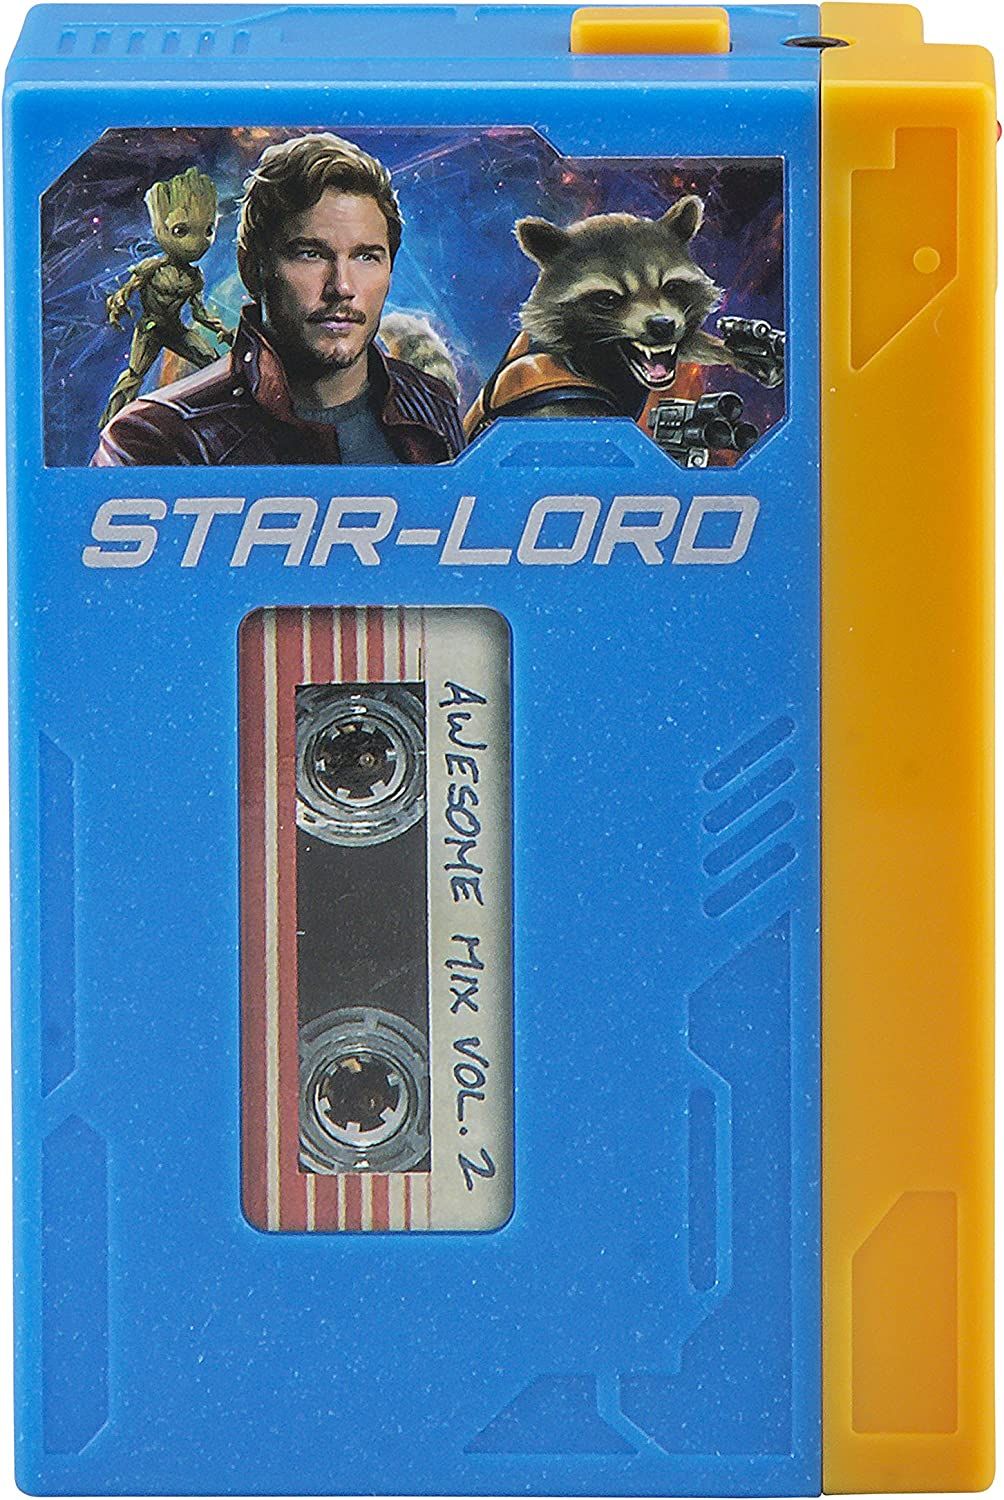 Guardians of the Galaxy Starlord Walkman Voice Recorder and MP3 Player